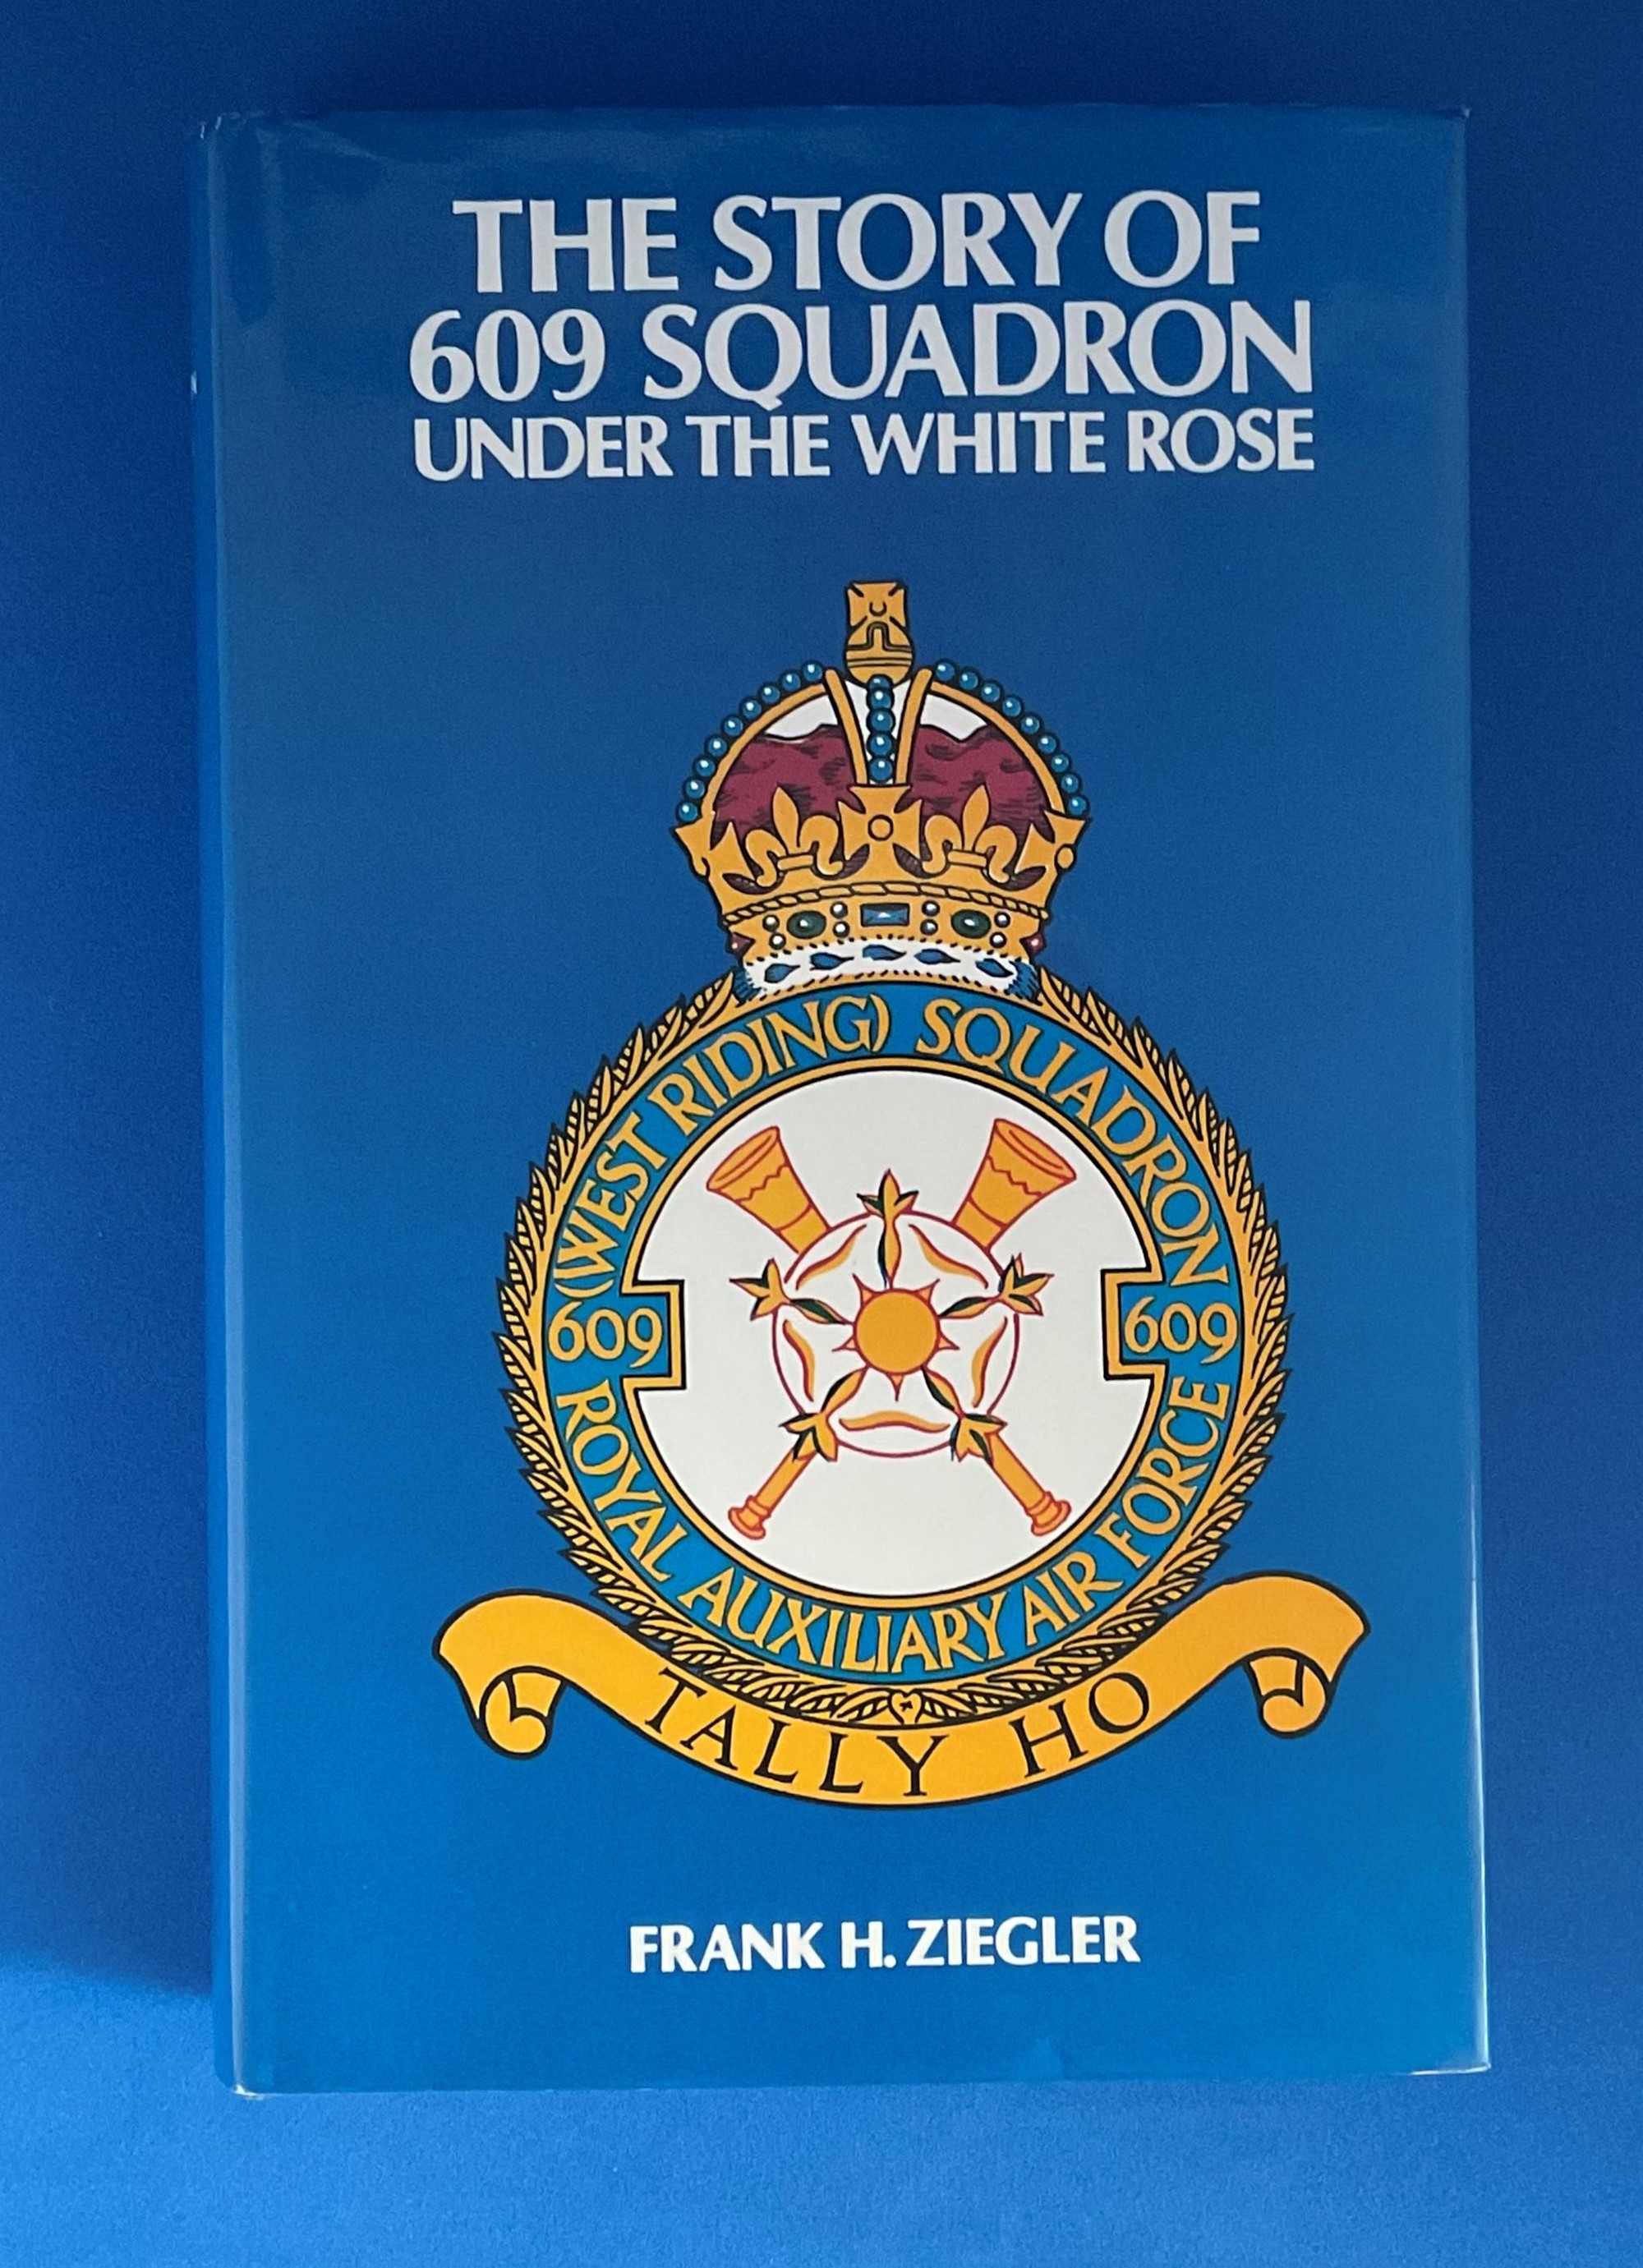 WW2 Fantastic Multi Signed Frank H Ziegler Book The Story of 609 Squadron Under The White Rose. - Image 2 of 2